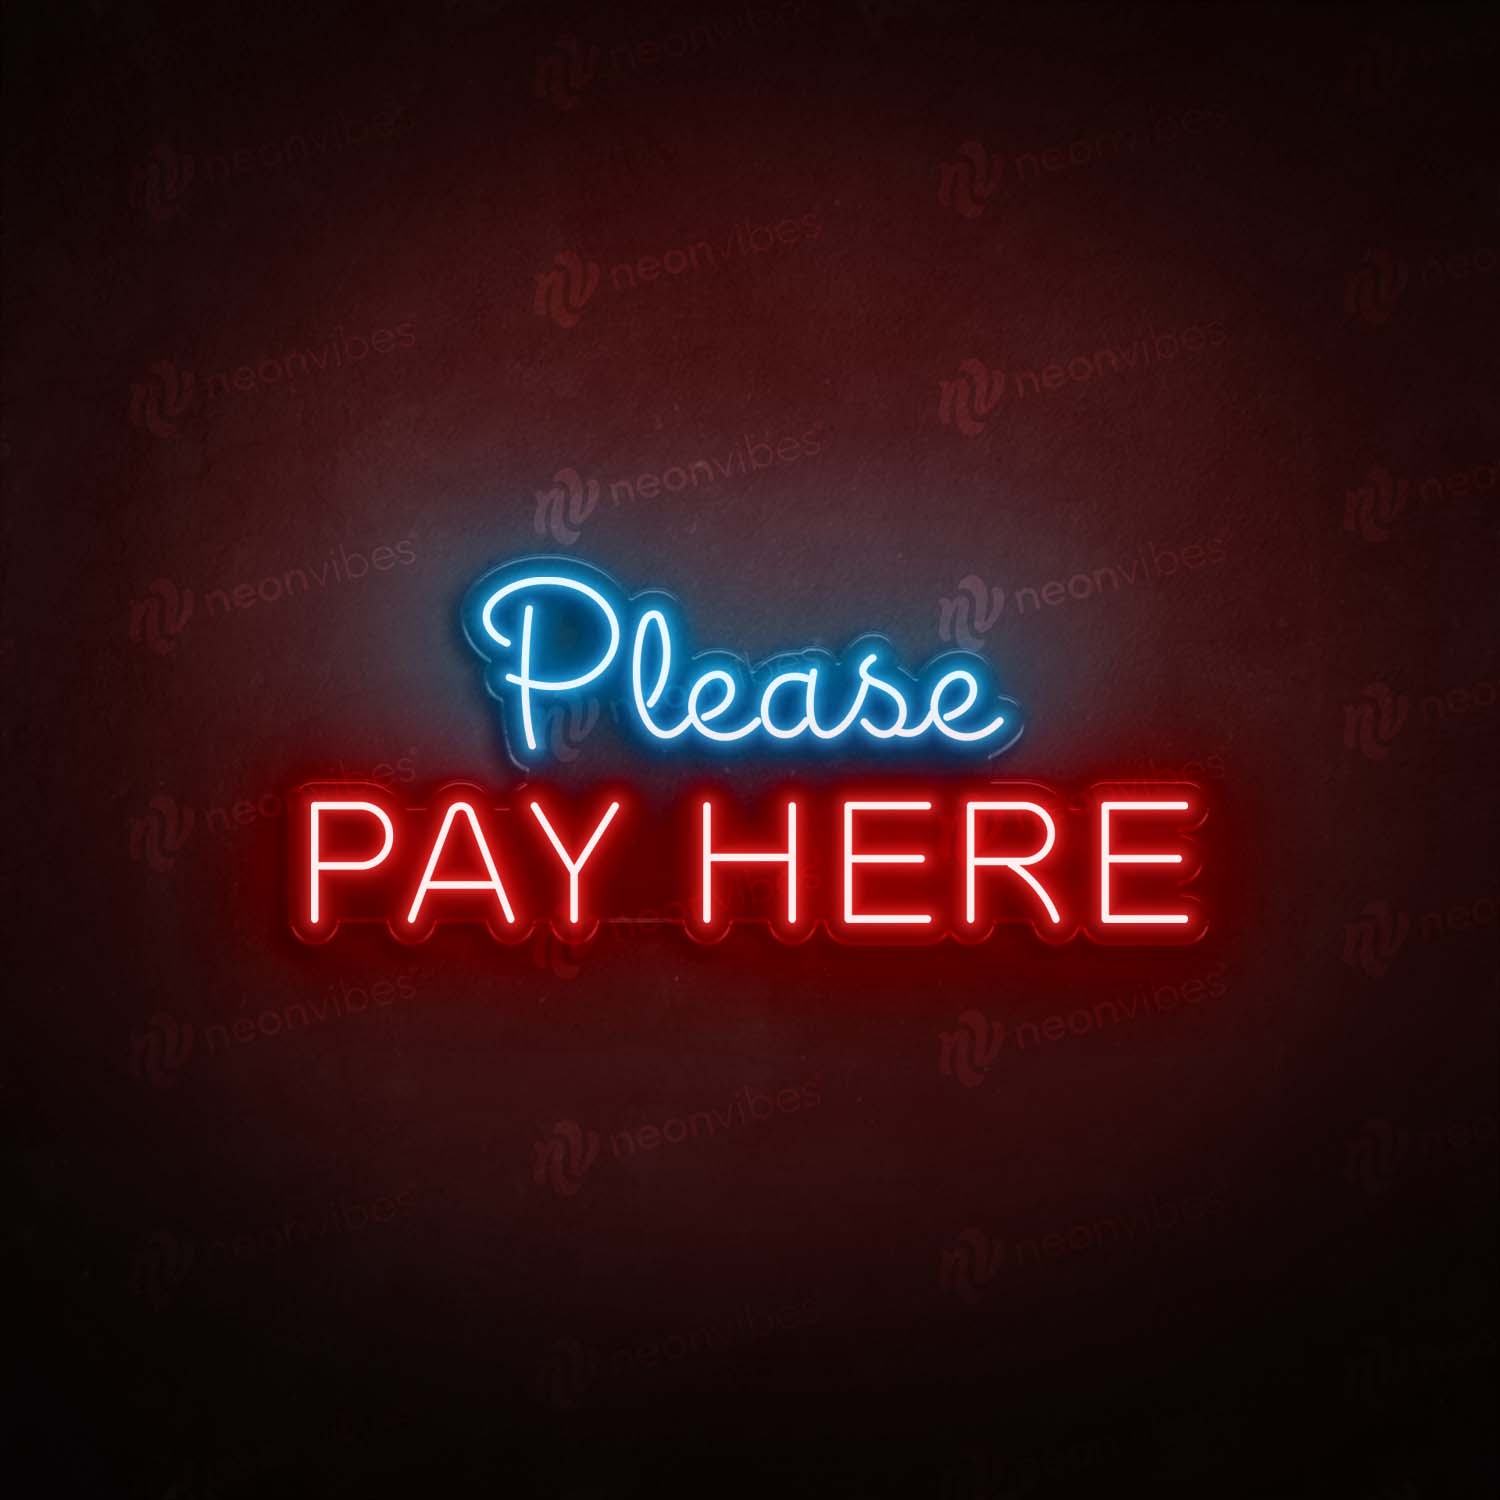 Please pay here neon sign